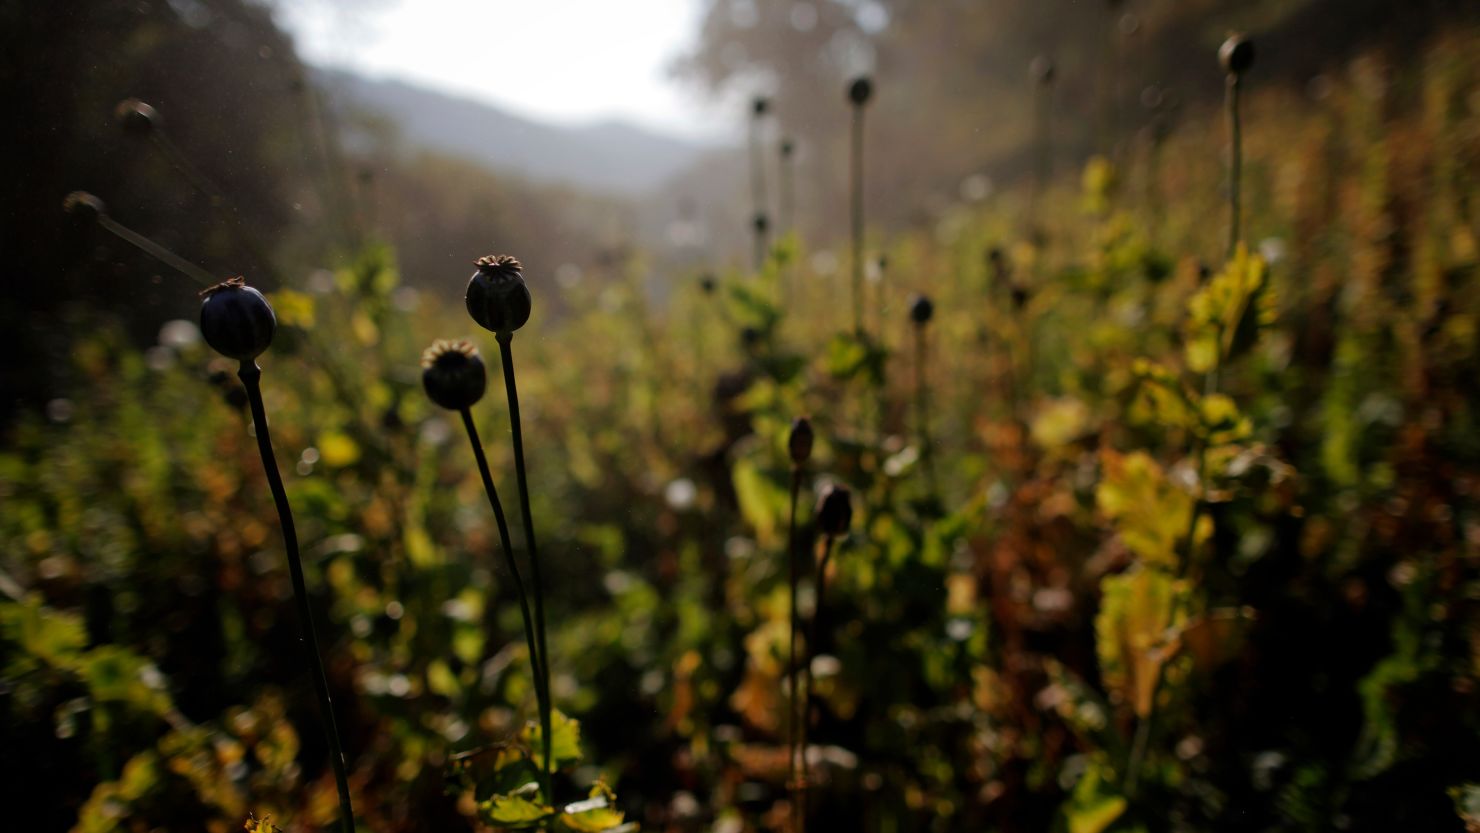 A poppy field is seen before policemen and farmers destroy it above the village of Ho Hwayt, in the mountains of Shan State January 26, 2012. Myanmar has dramatically escalated its poppy eradication efforts since September 2011, threatening the livelihoods of impoverished farmers who depend upon opium as a cash crop to buy food. With new ceasefires ending years of conflict between the government and ethnic insurgents, Myanmar police and United Nations officials are travelling through opium-rich Shan State to ask farmers what assistance they need. REUTERS/Damir Sagolj (MYANMAR - Tags: DRUGS SOCIETY)